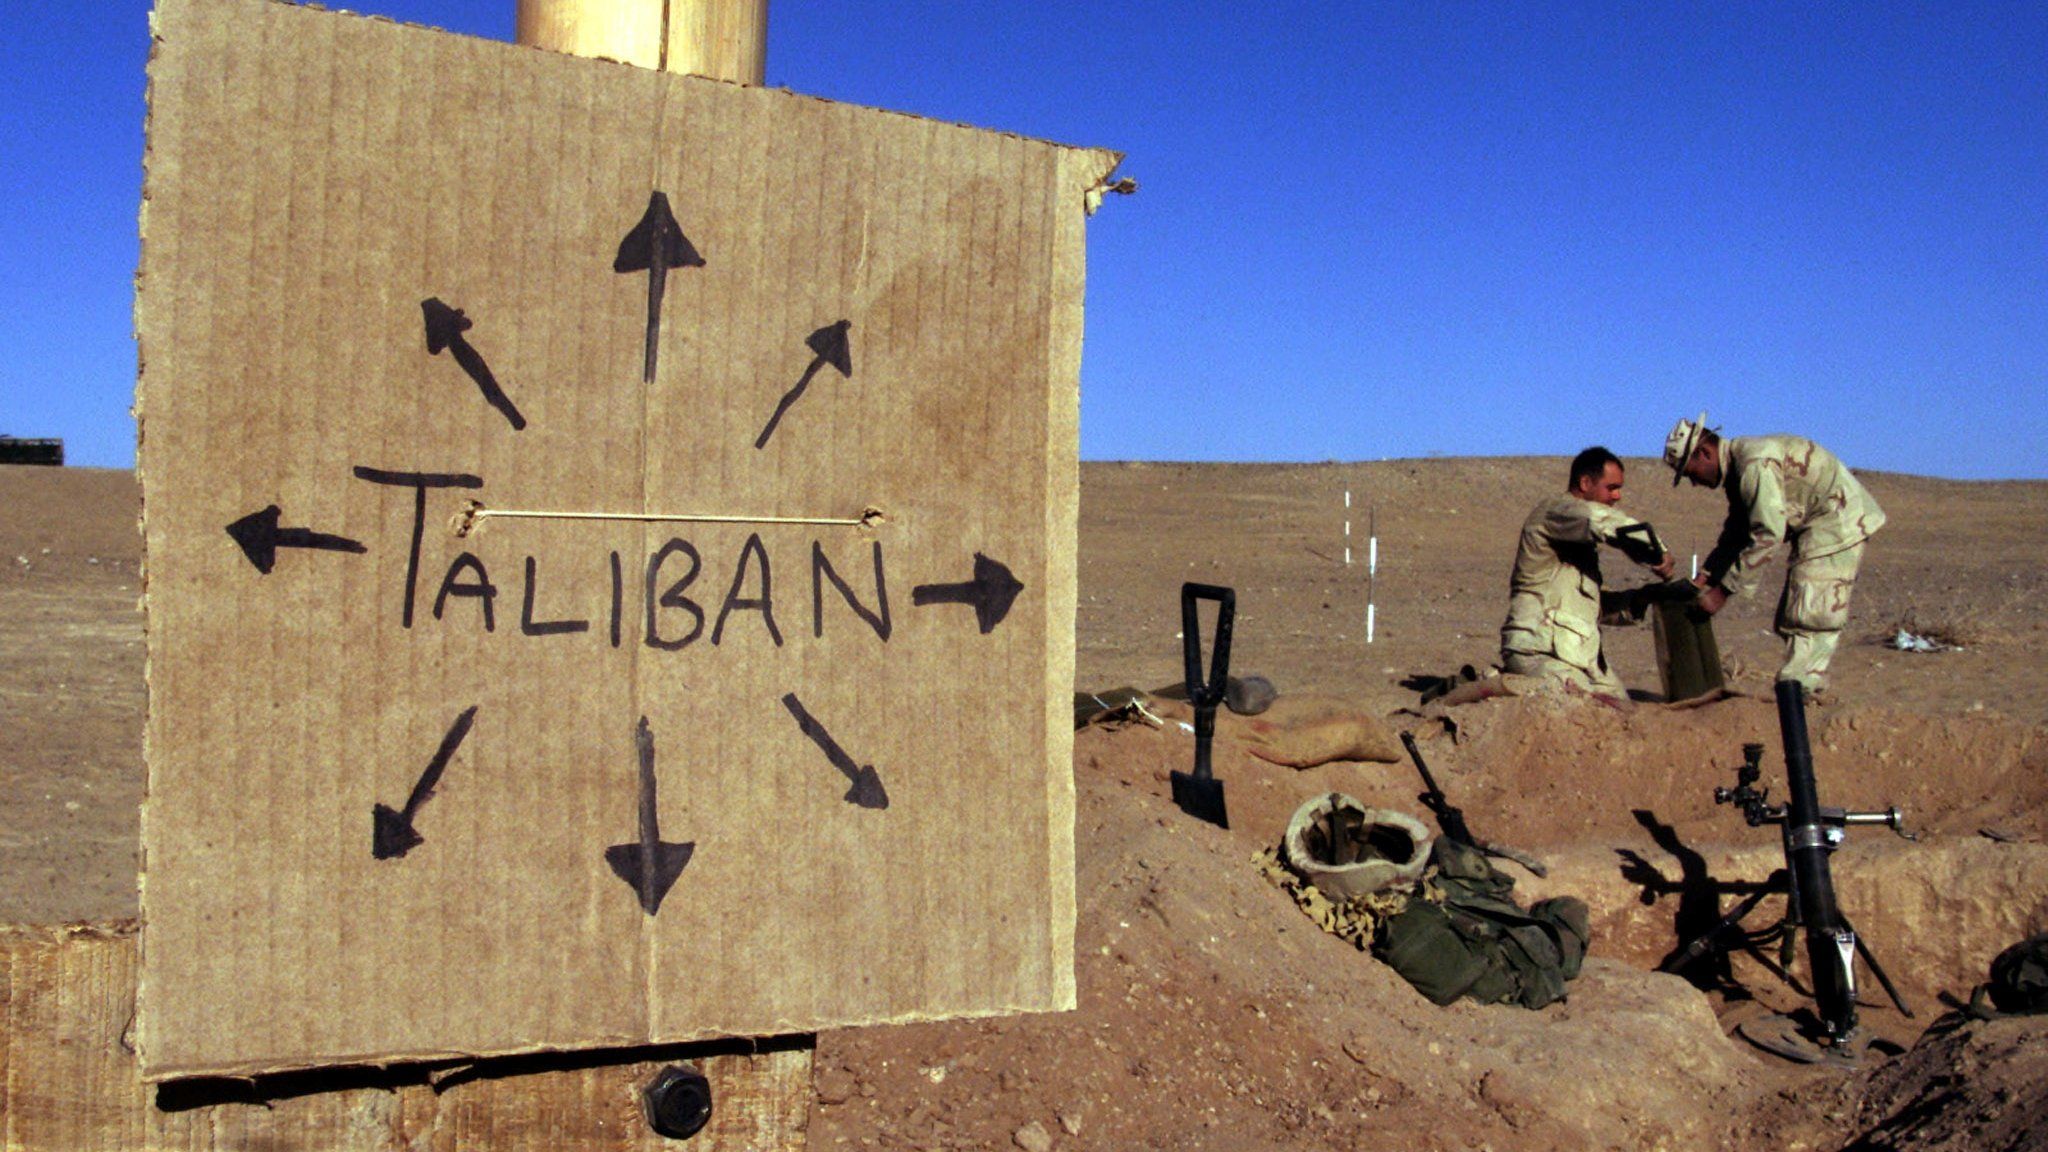 A sign reading "Taliban" at a US marine outpost in Afghanistan, 2001